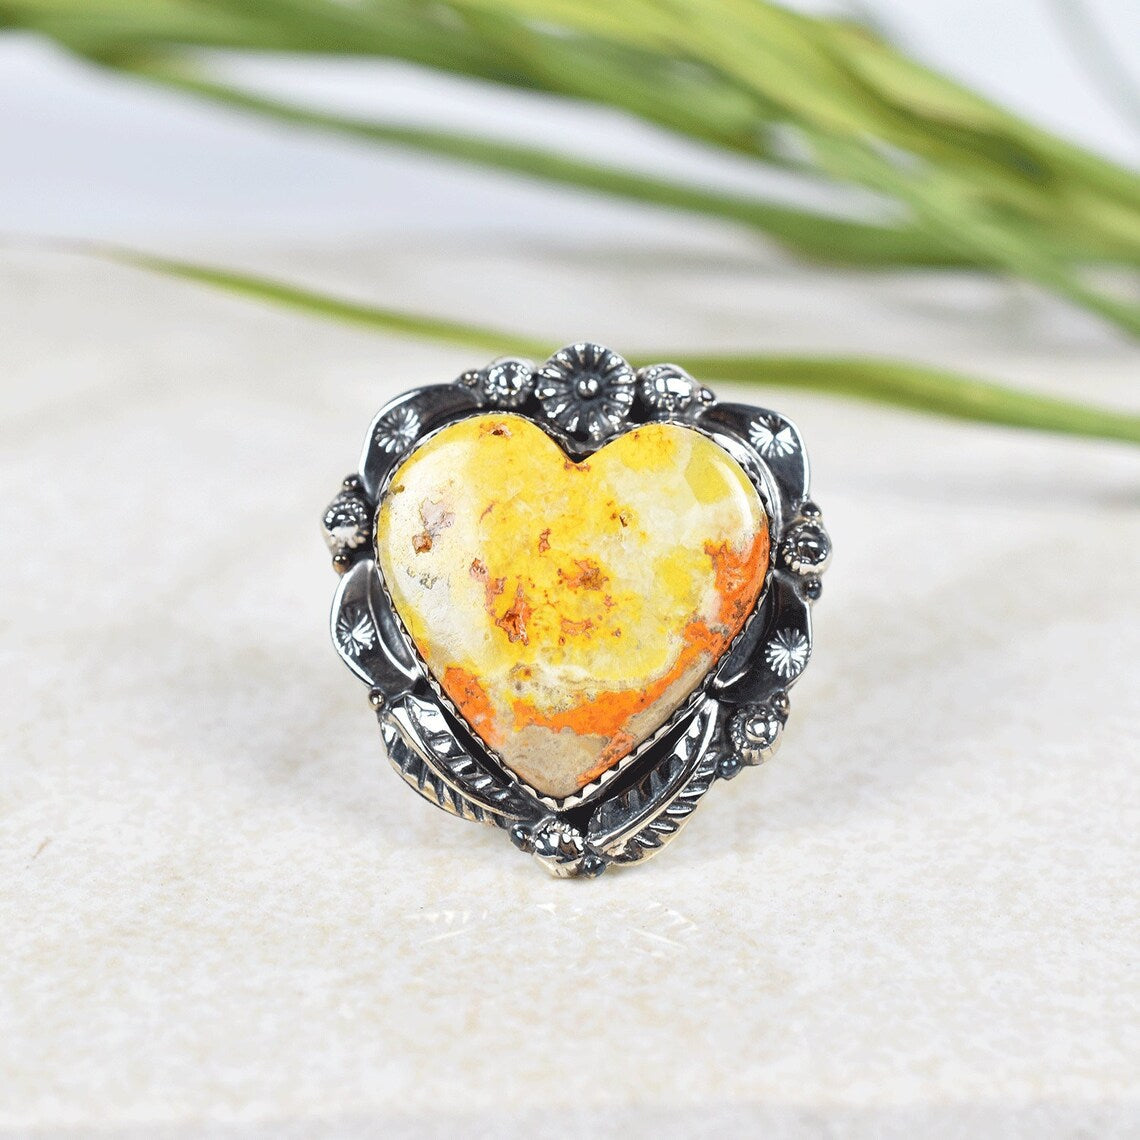 Native American Heart Cut Bumble Bee Jasper Cocktail Rings - 925 Sterling Silver Rings